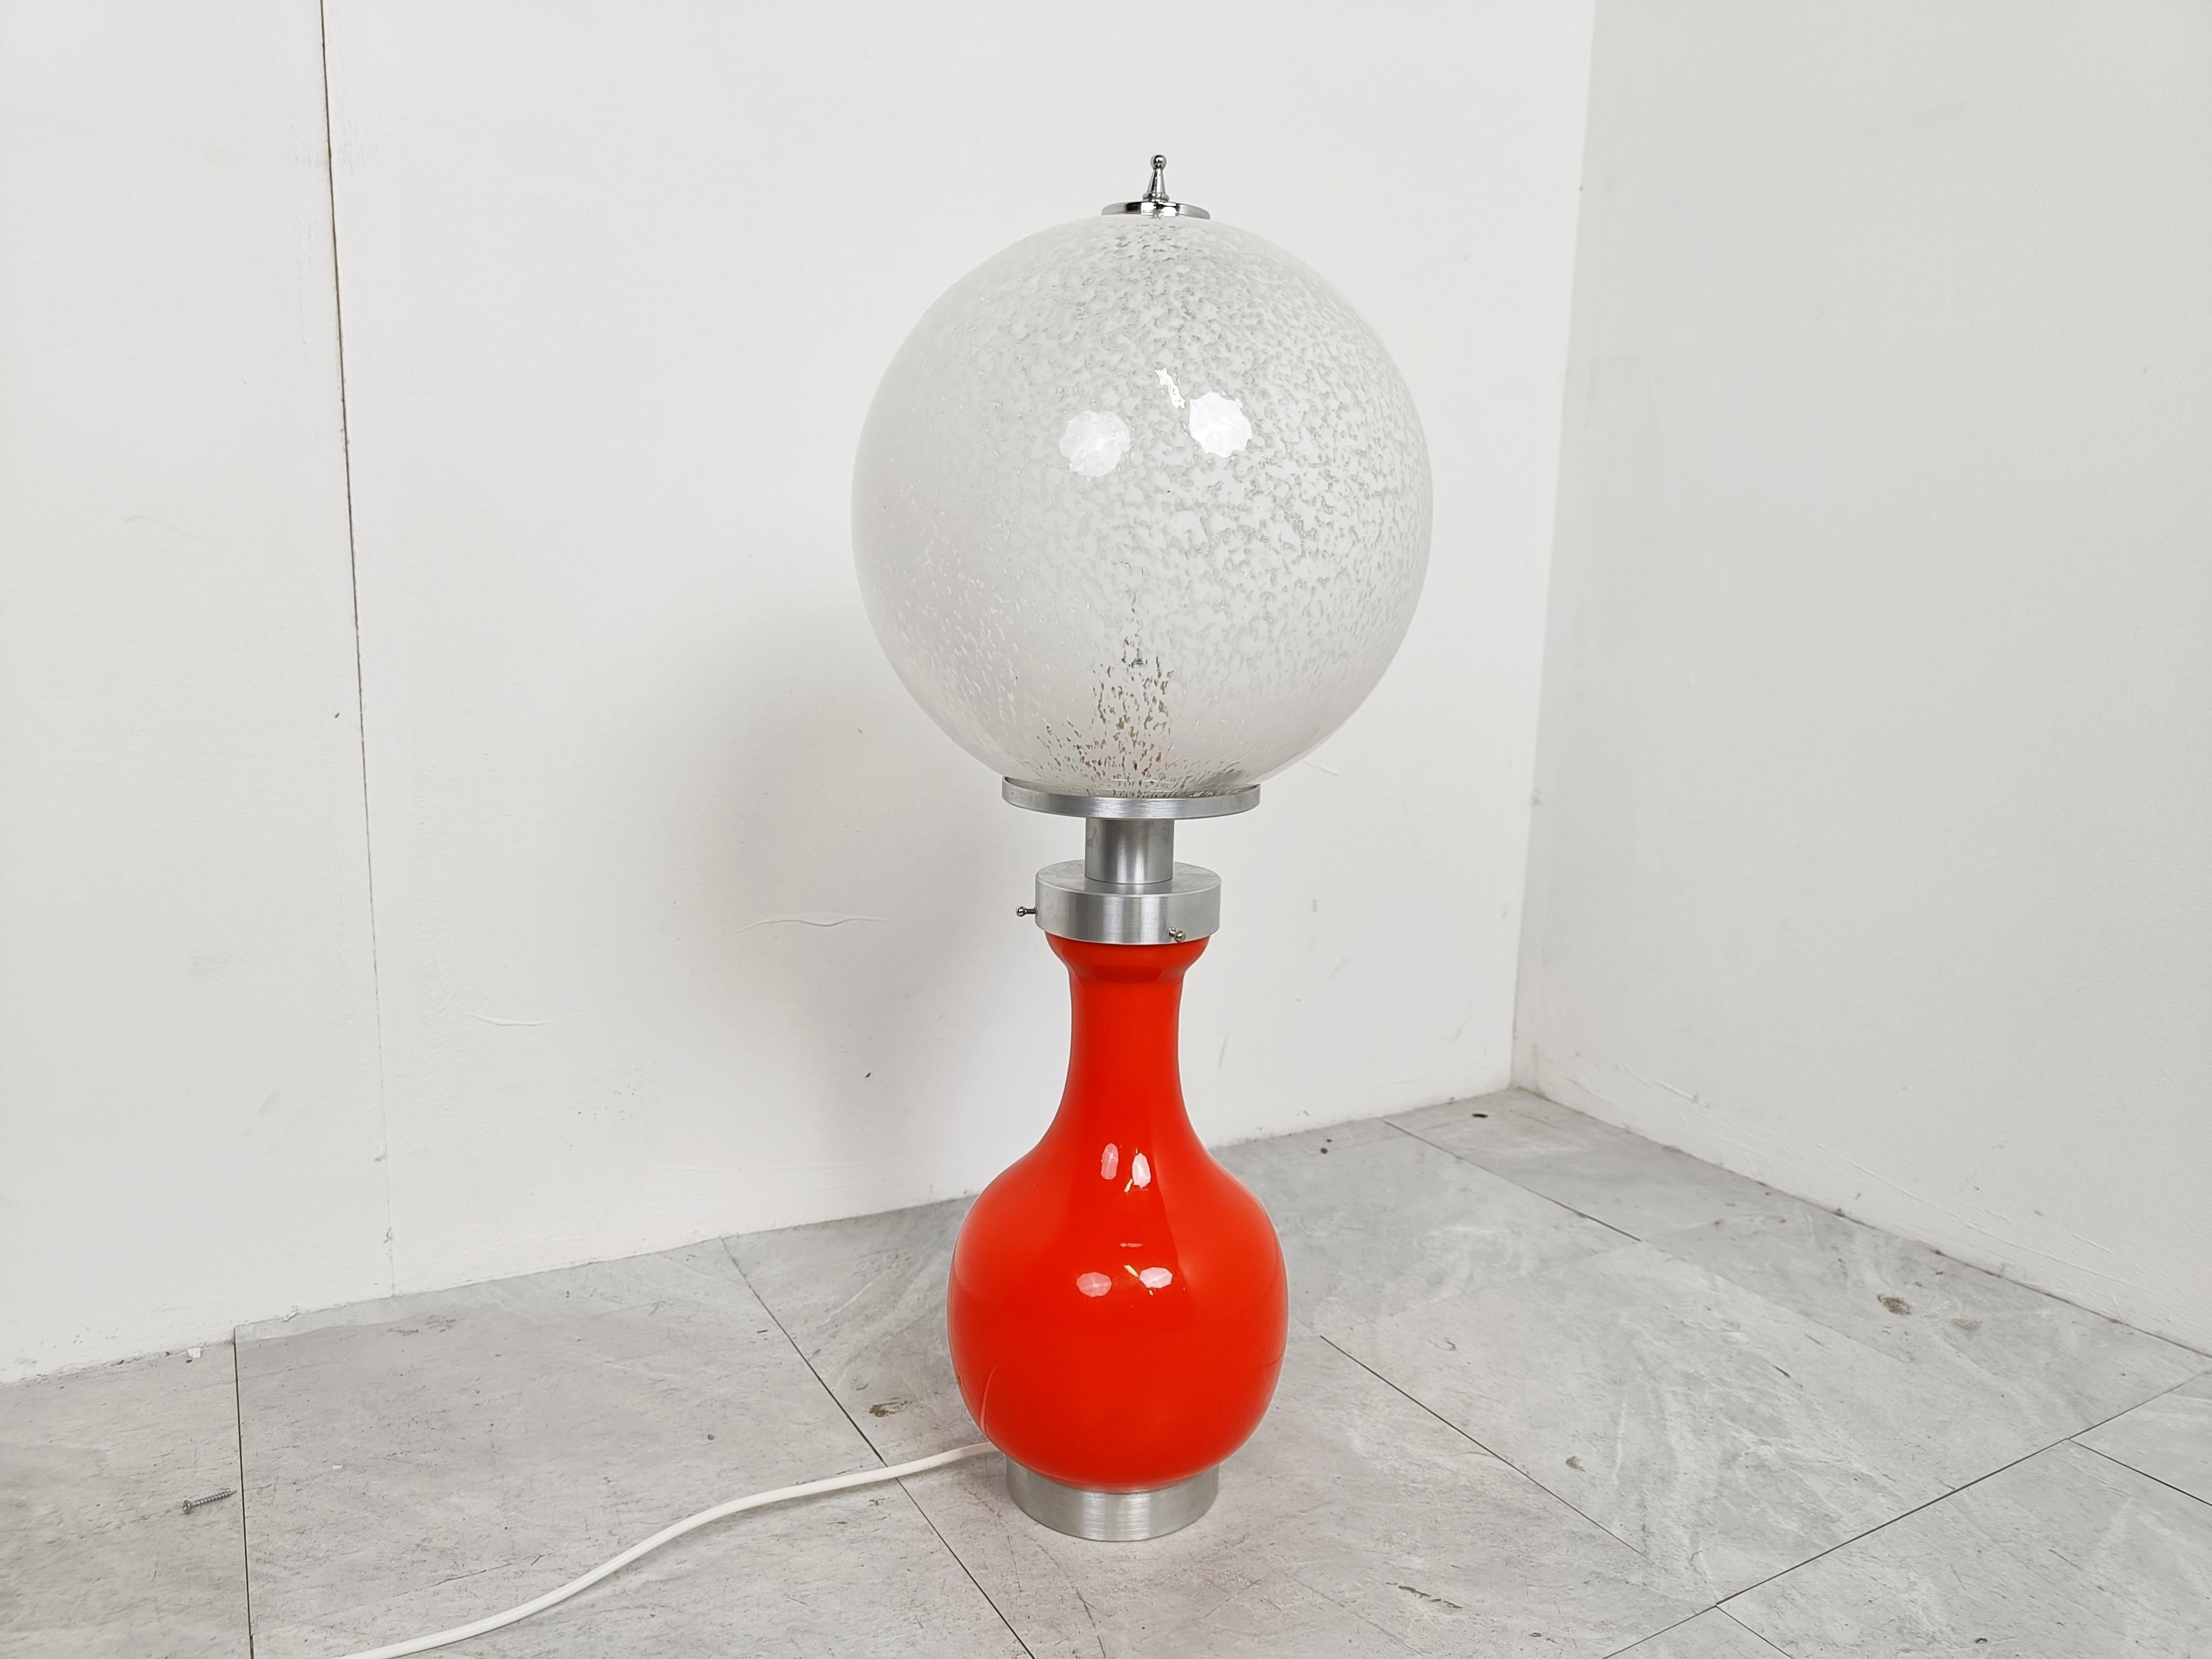 Midcentury table lamp by Mazzega with white and orange opaline glass and chrome.

Beautiful midcentury lamp which emits a soft DIM light.

Good condition, tested and ready to use.

You can illuminated both upper and lwoer part of the lamp